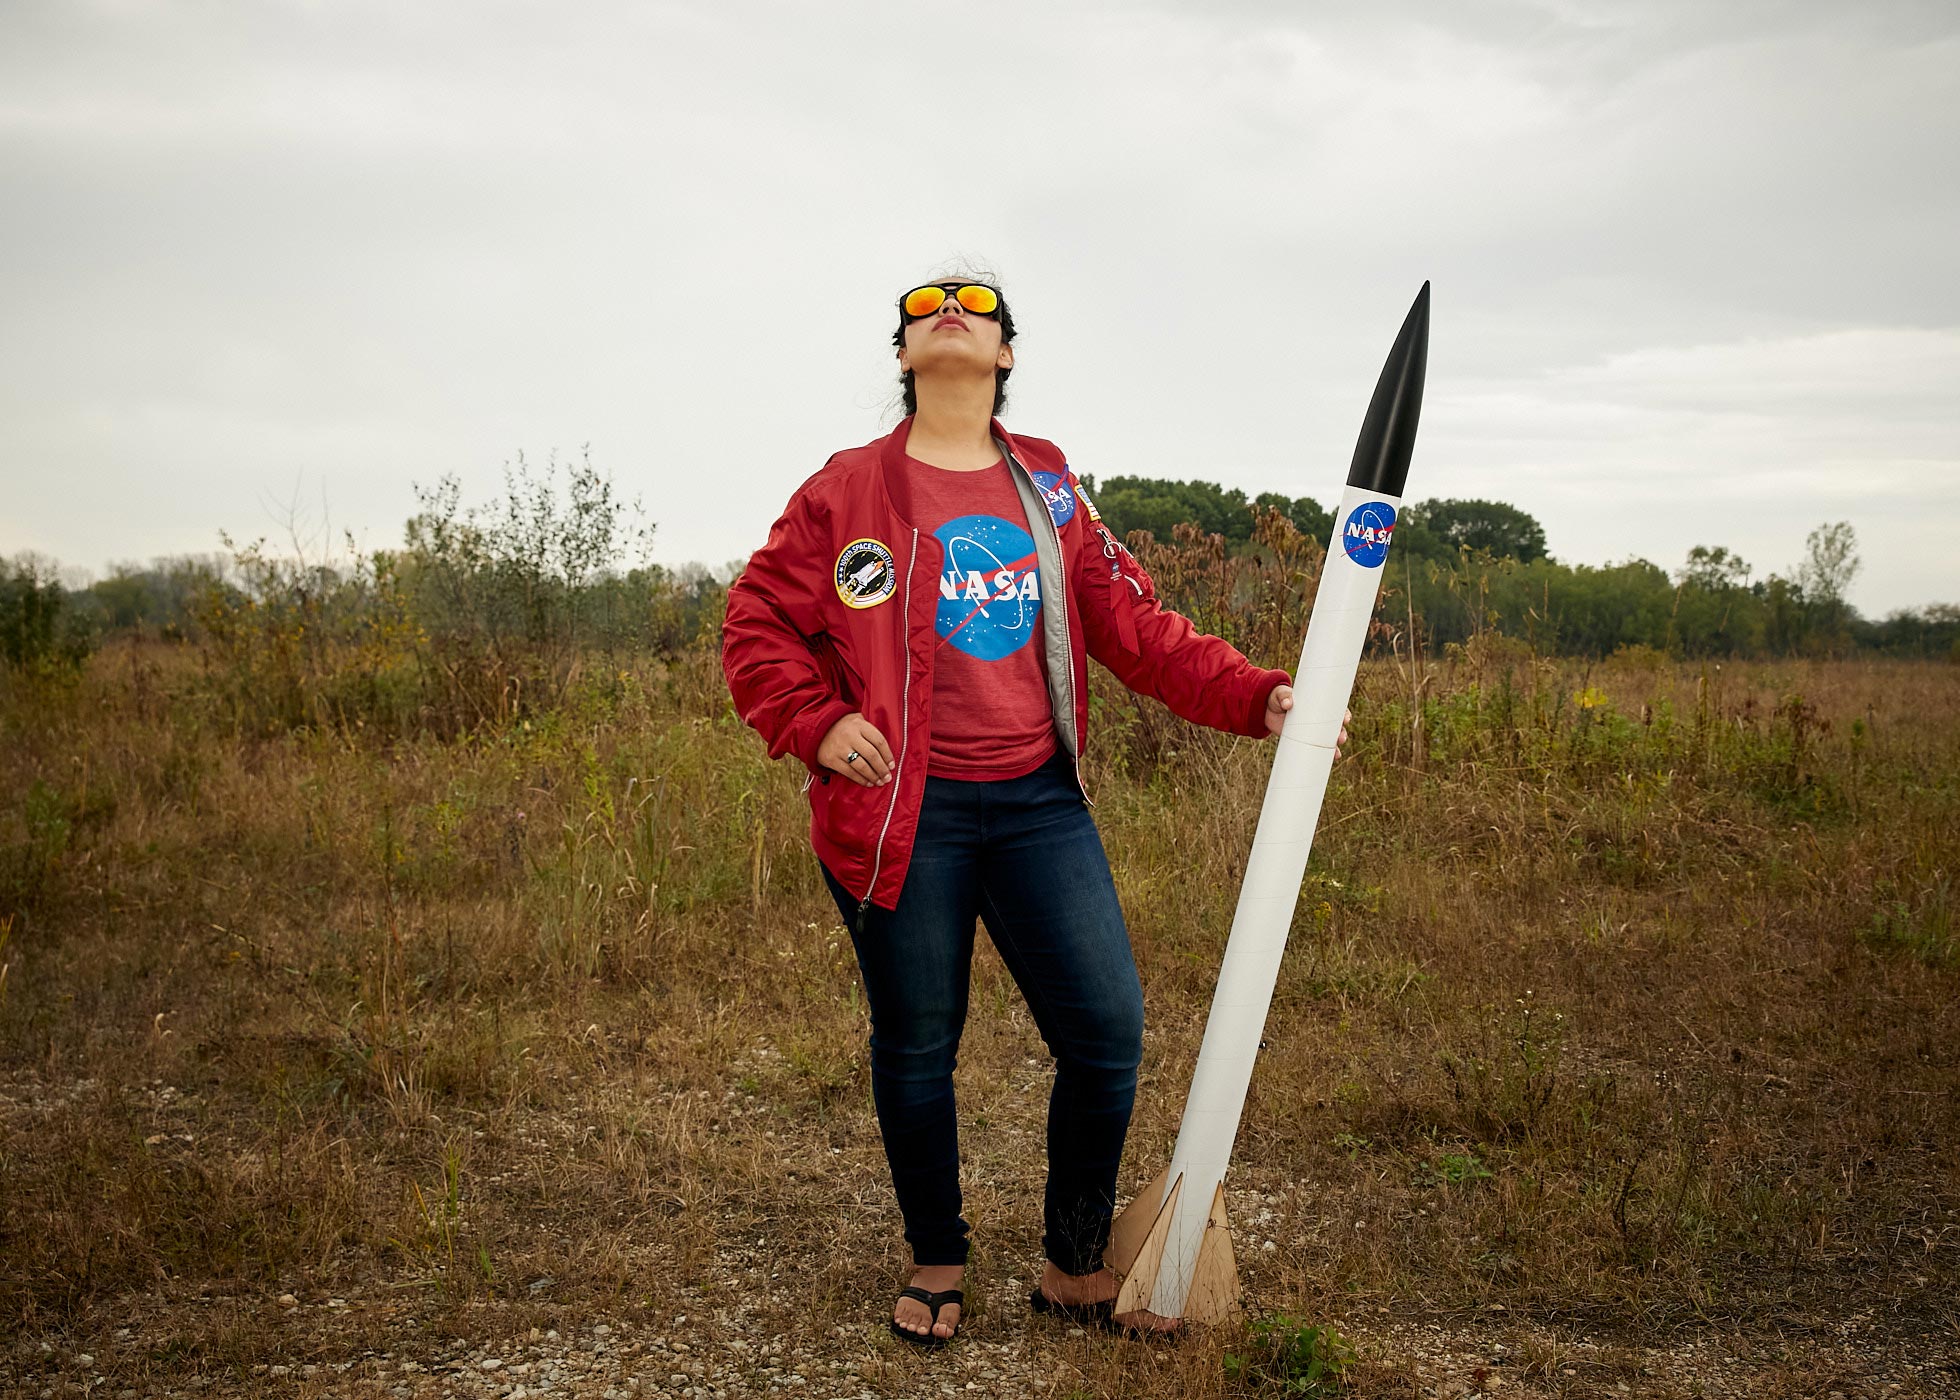 Teen girl launching large rockets | Childrens photography by Saverio Truglia